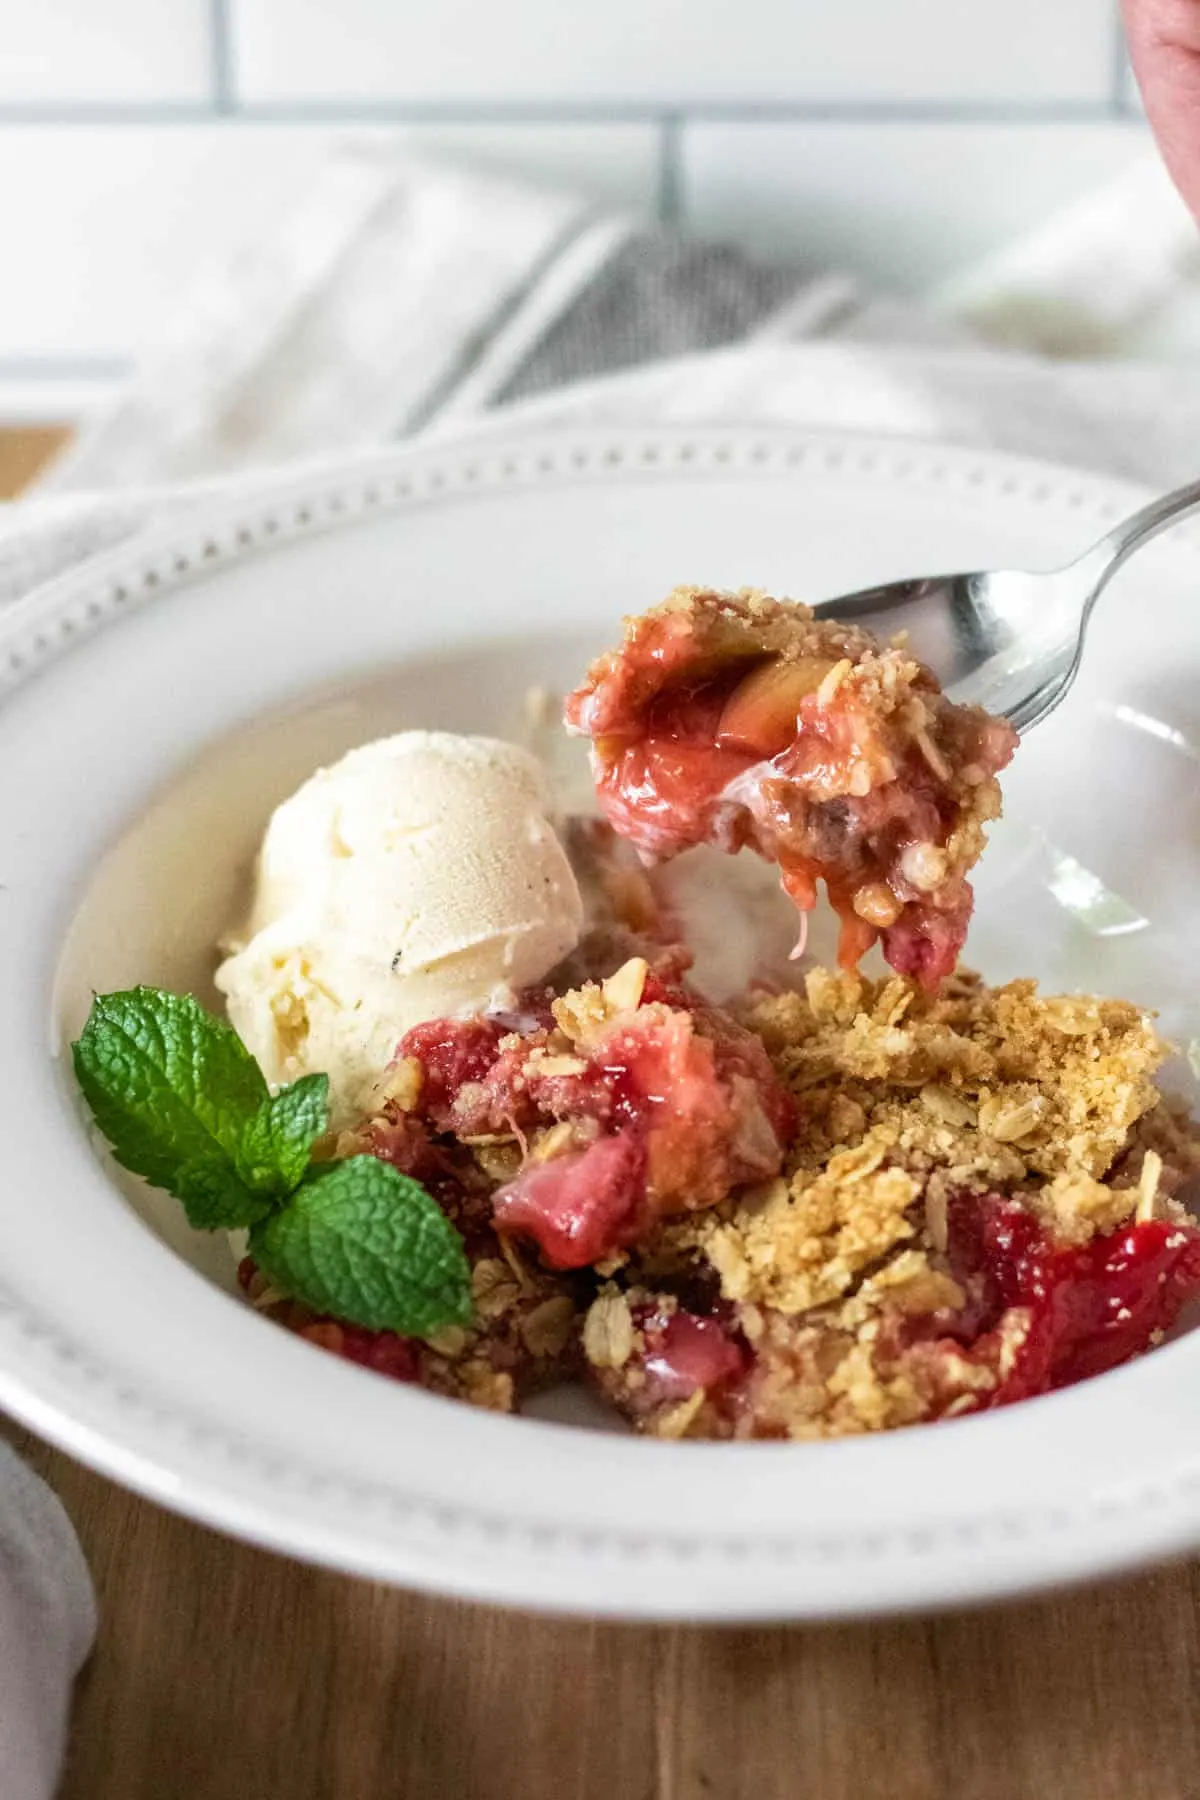 Spoonful of strawberry rhubarb crisp coming out of bowl with scoop of ice cream.